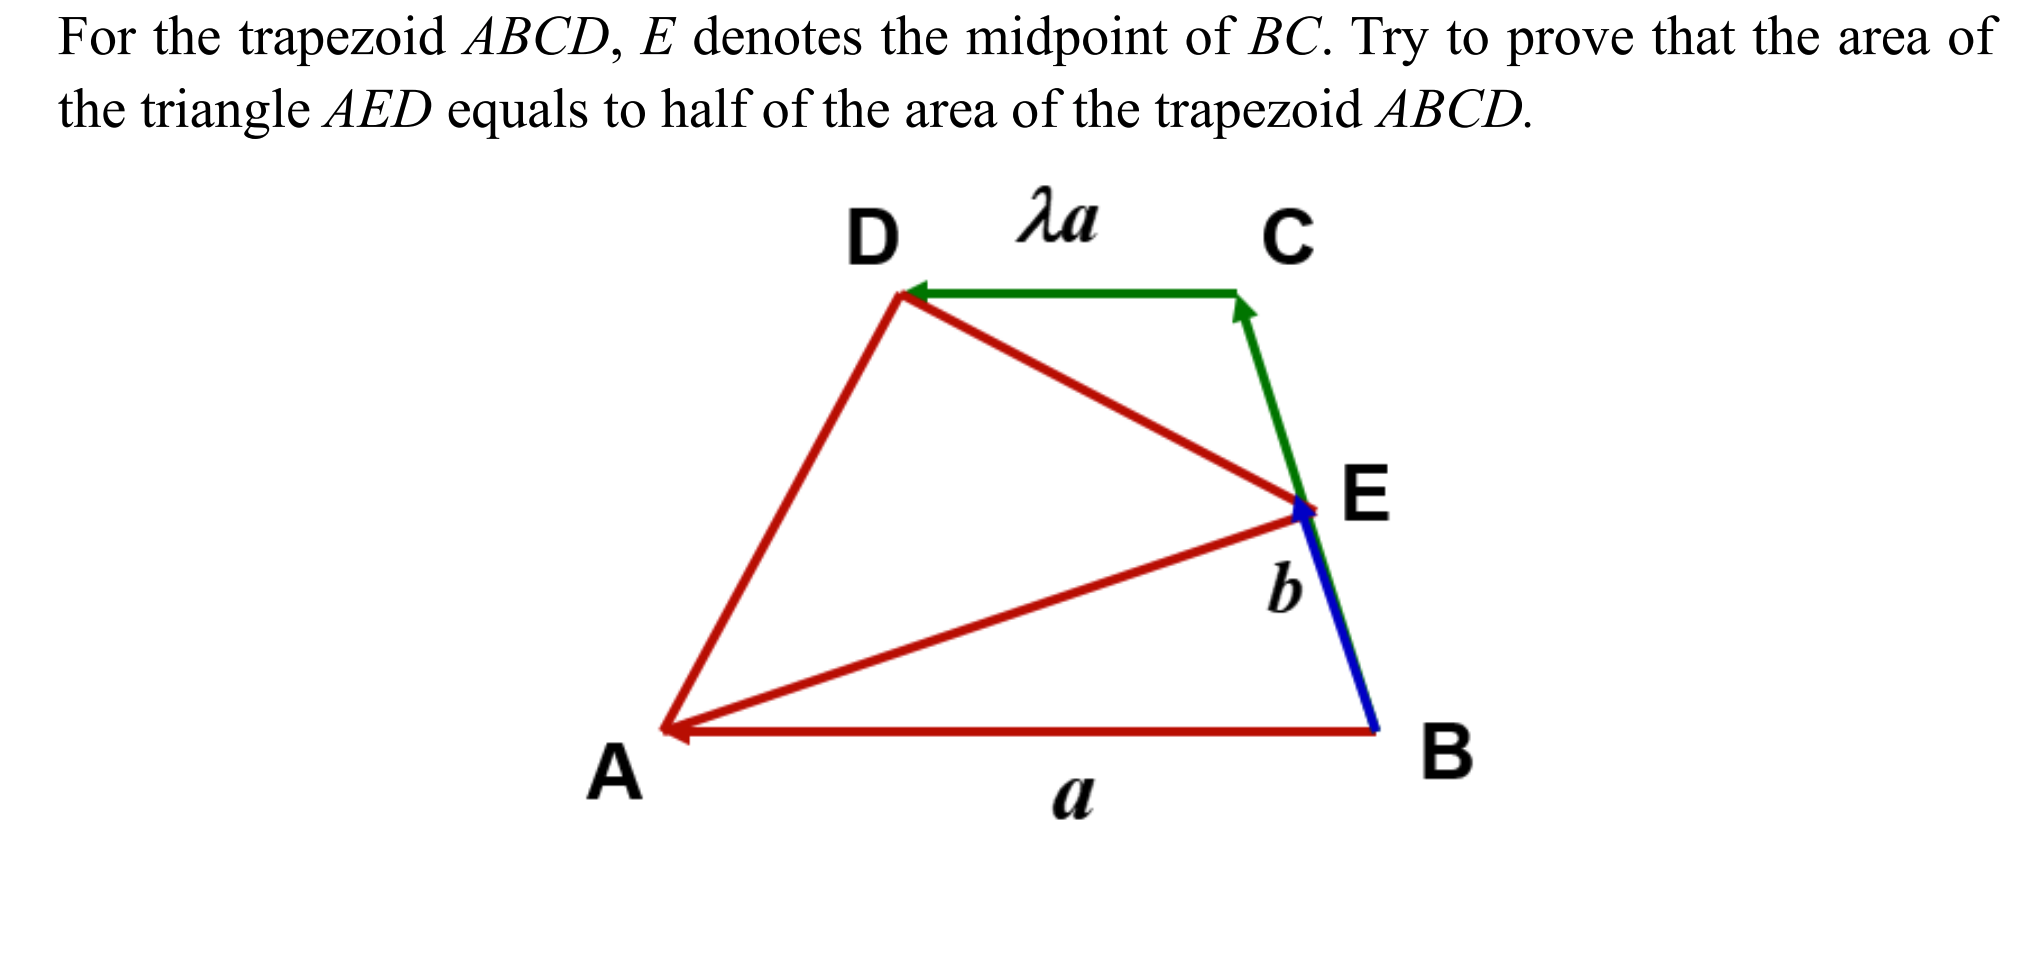 For the trapezoid ABCD, E denotes the midpoint of BC. Try to prove that the area of
the triangle AED equals to half of the area of the trapezoid ABCD.
da
